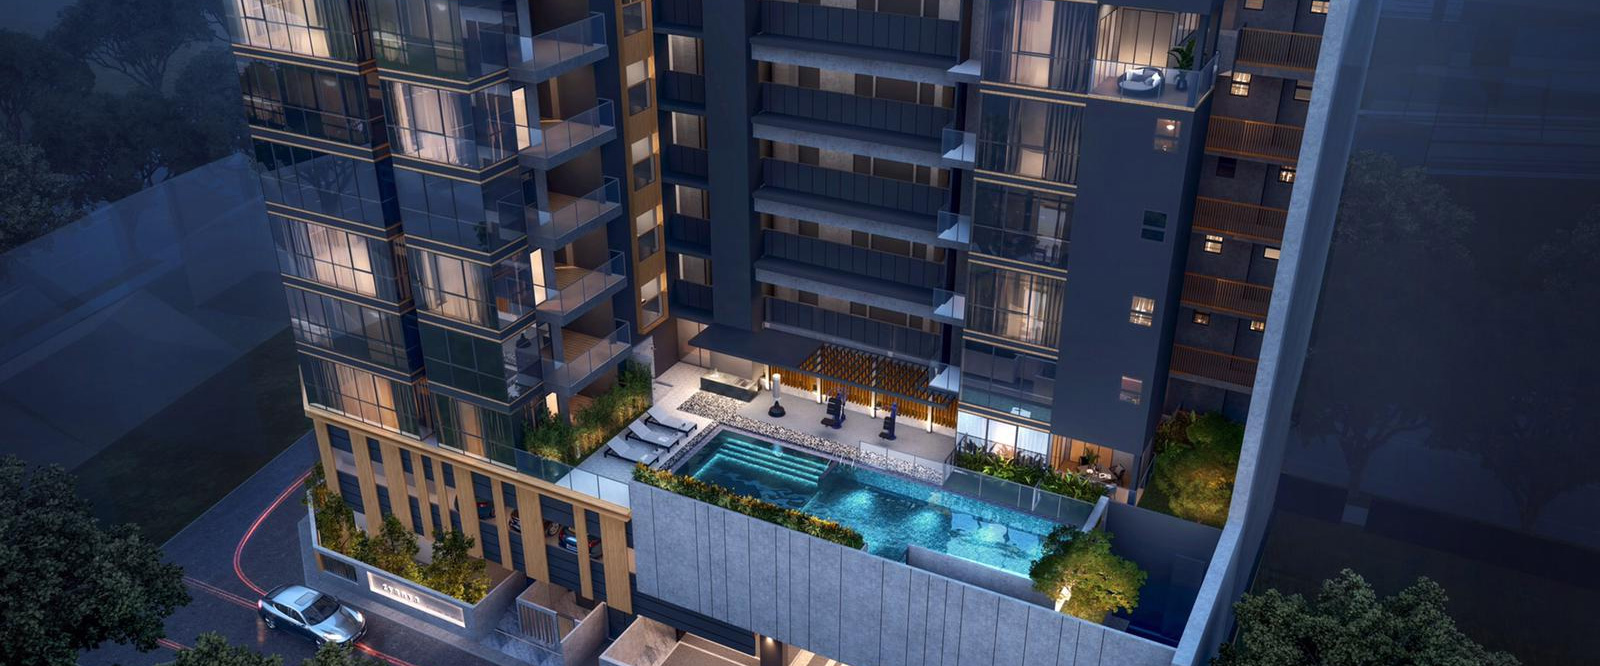 Discover Level 3 recreational facilities for residents of Zyanya Condo